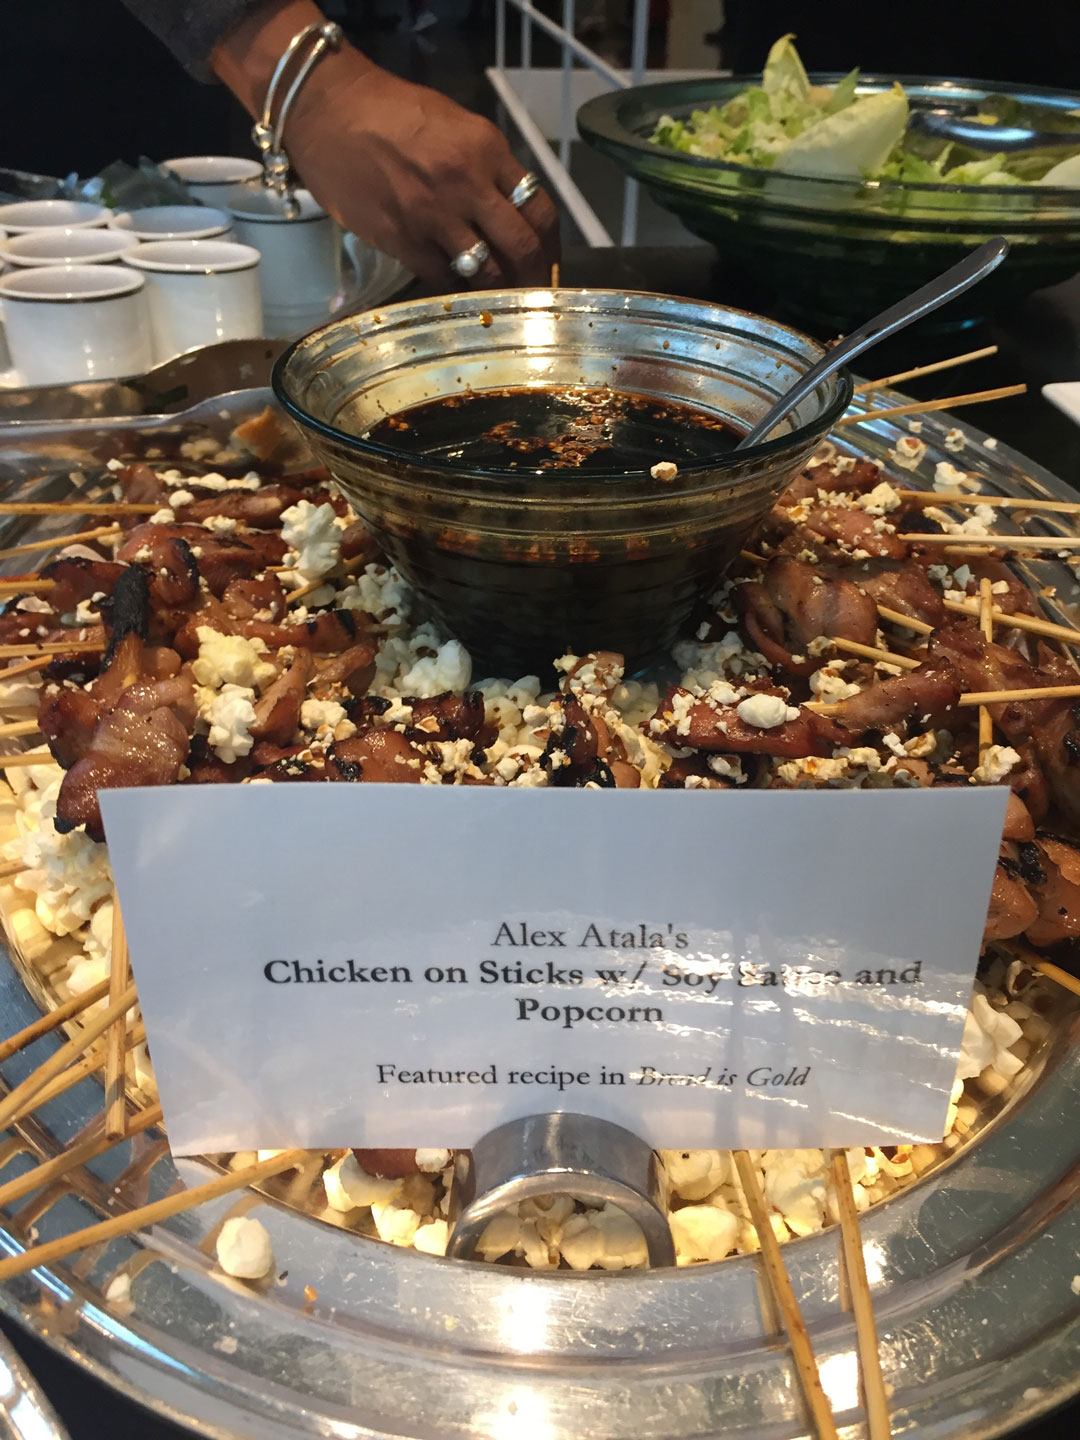 Alex Atala's Chicken on Sticks with Soy Sauce and Popcorn